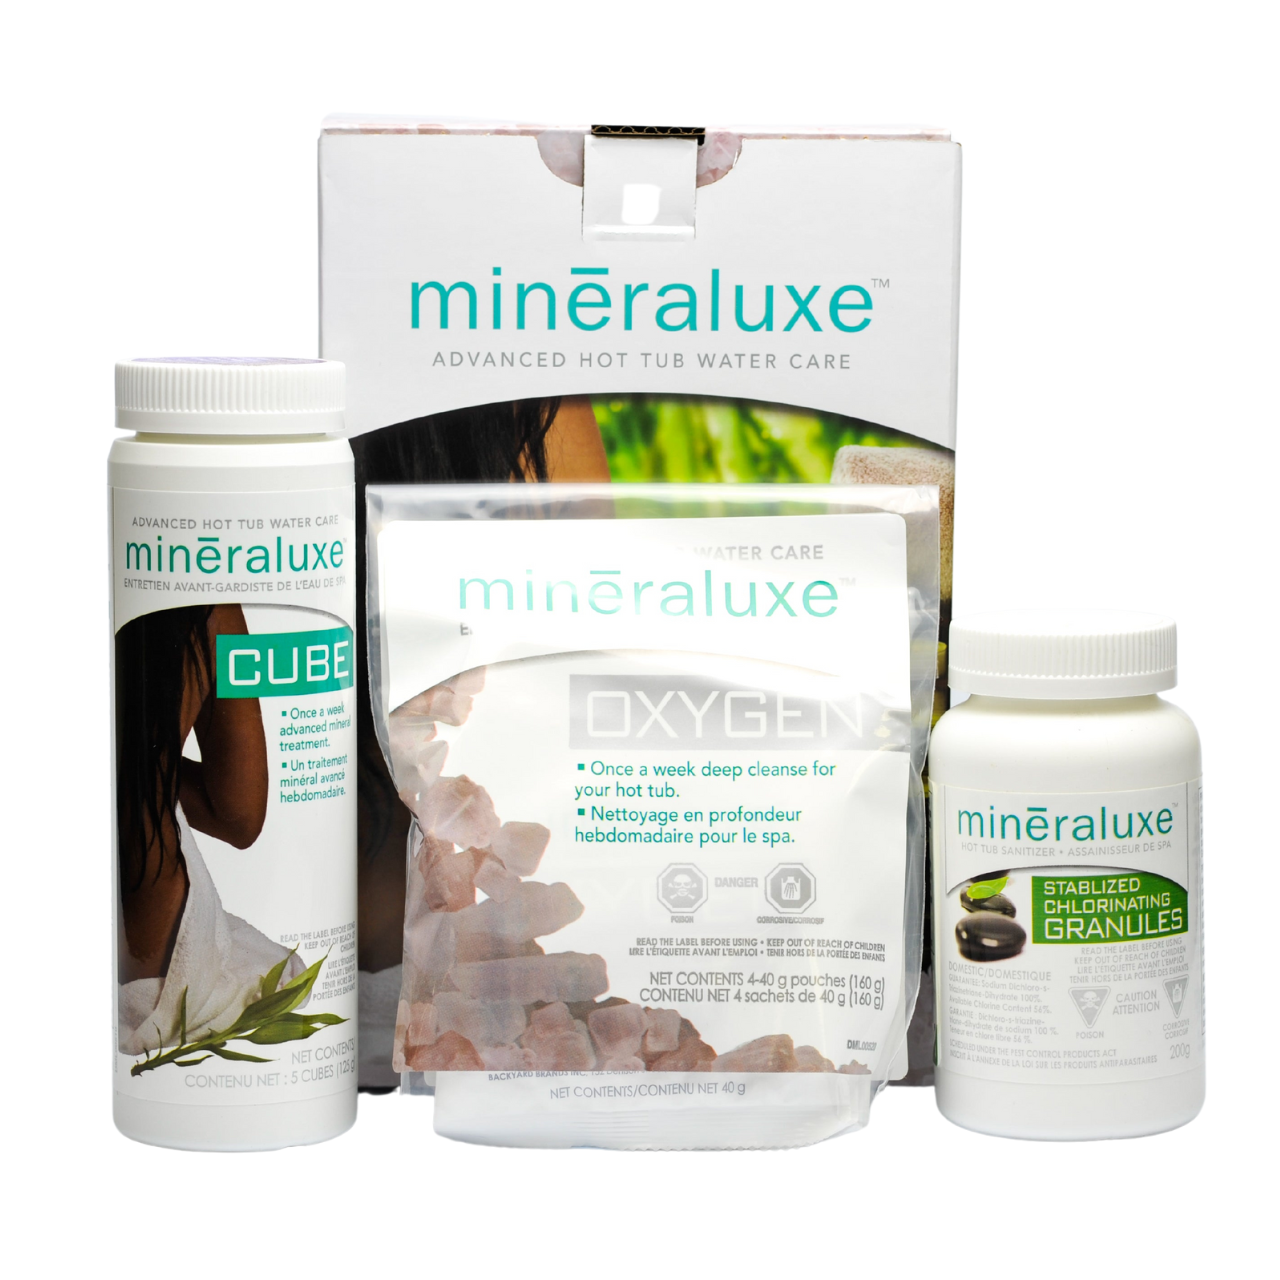 Mineraluxe™ 1 Month Chlorine Mineraluxe System (Dichlor)